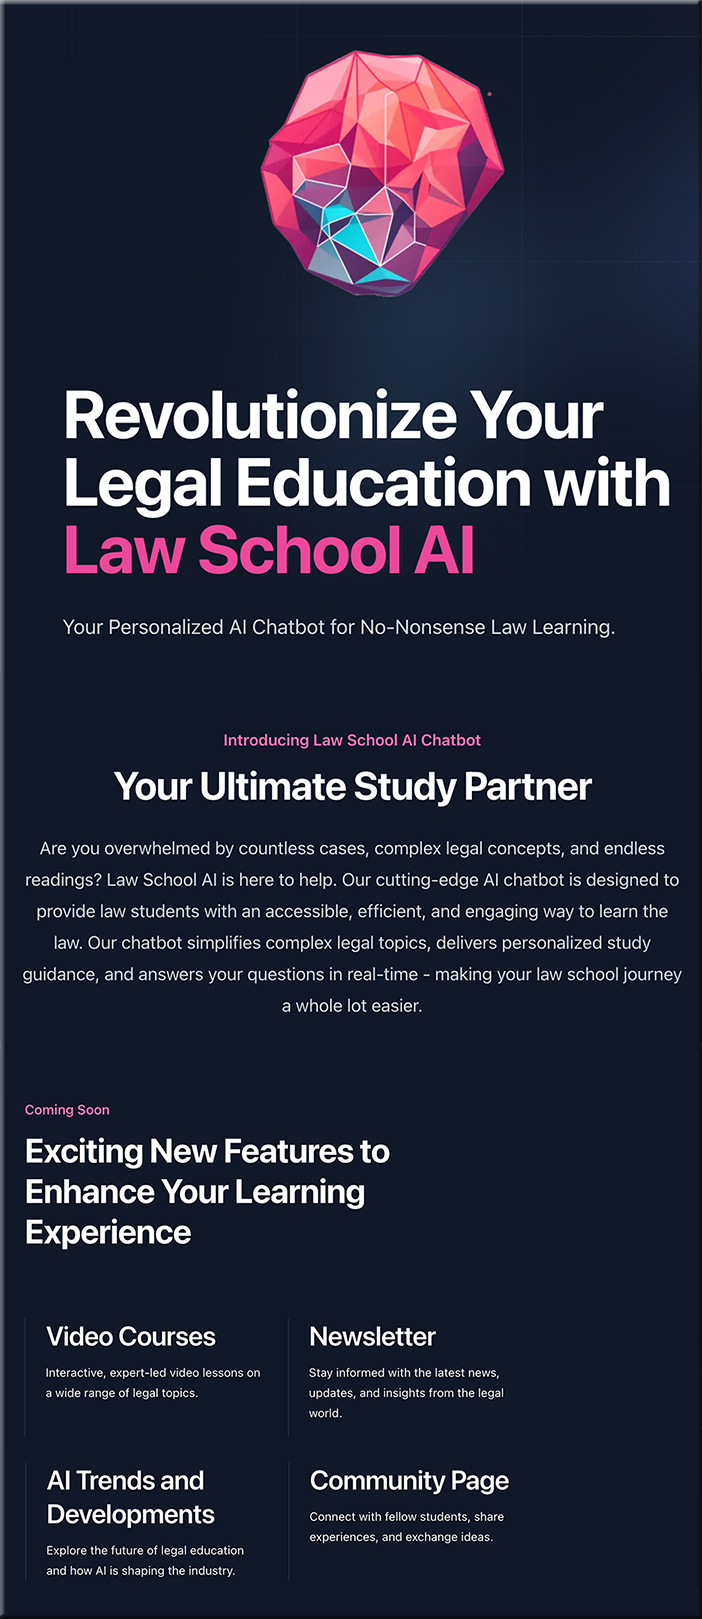 law-school-ai.vercel.app -- Your Personalized AI Chatbot for No-Nonsense Law Learning.